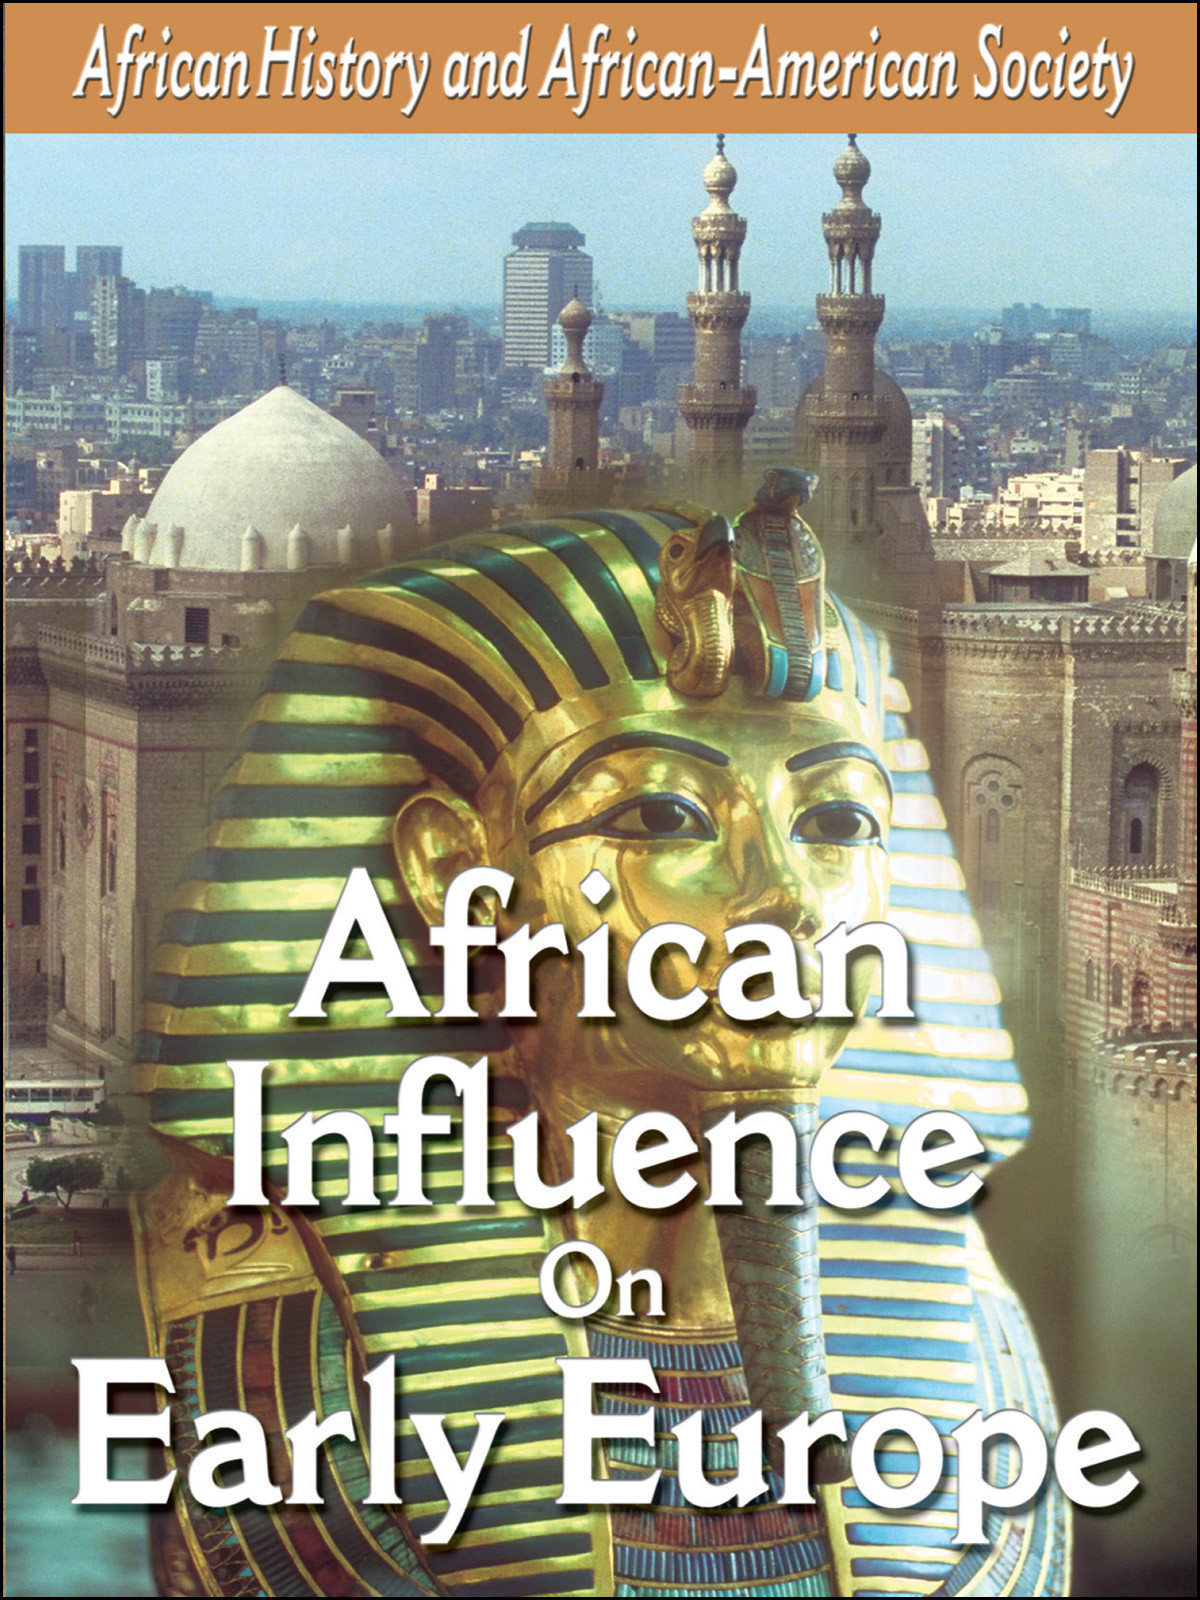 L905 - African-American History African Influences on Early Europe